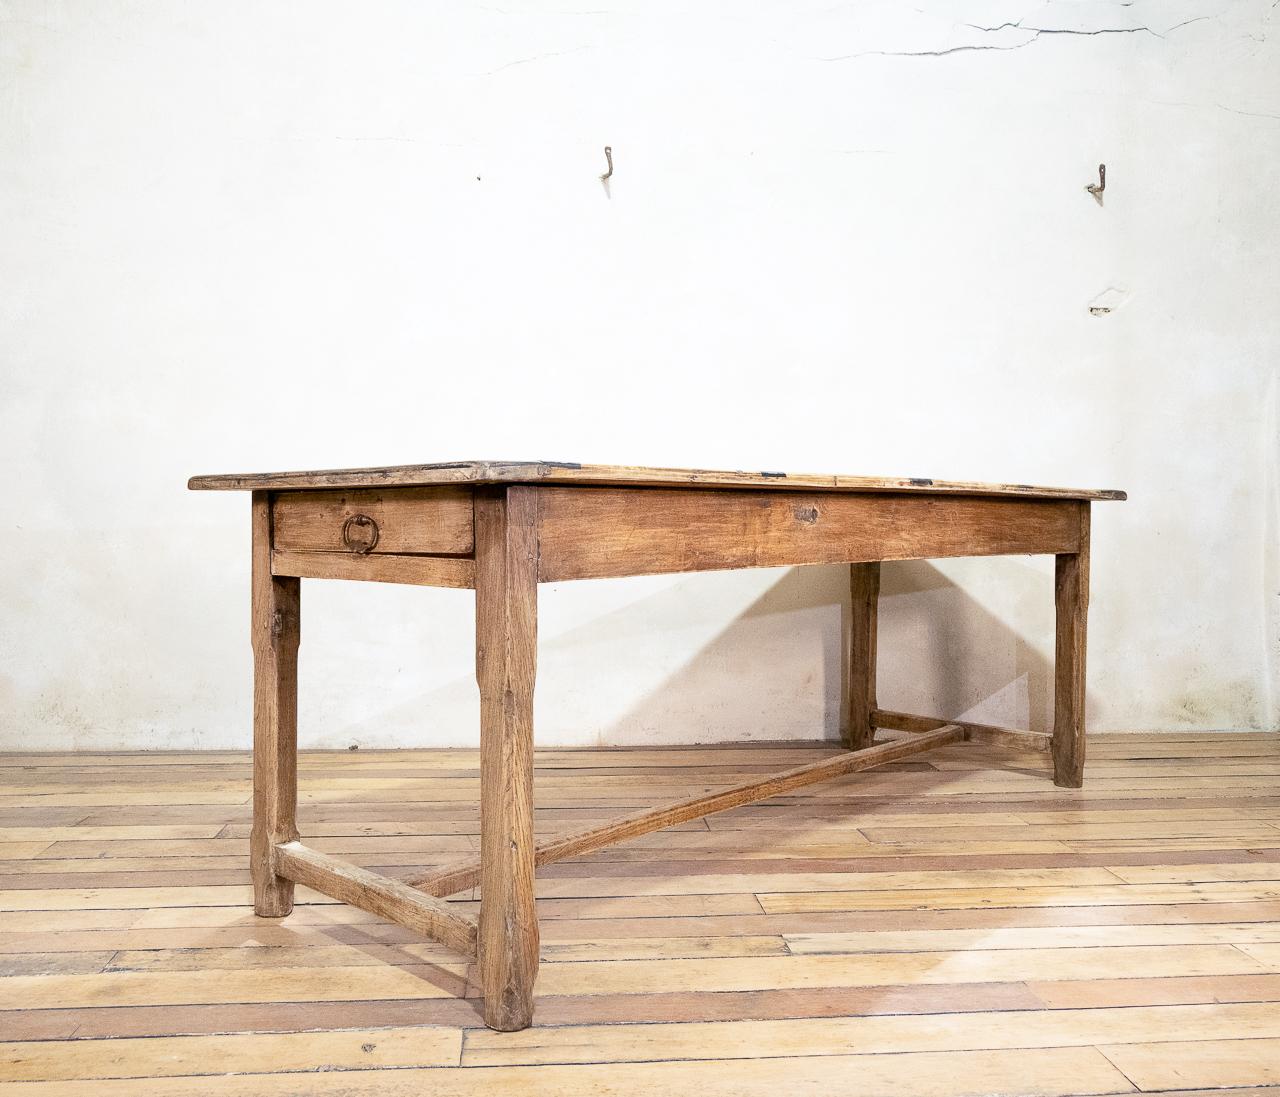 A charming early 20th century French painted refectory table. Raised on four chamfered legs, united by stretchers - demonstrating drawers to each end of the apron. The table displays a sunbleached oak base with a unique painted gridlike design to